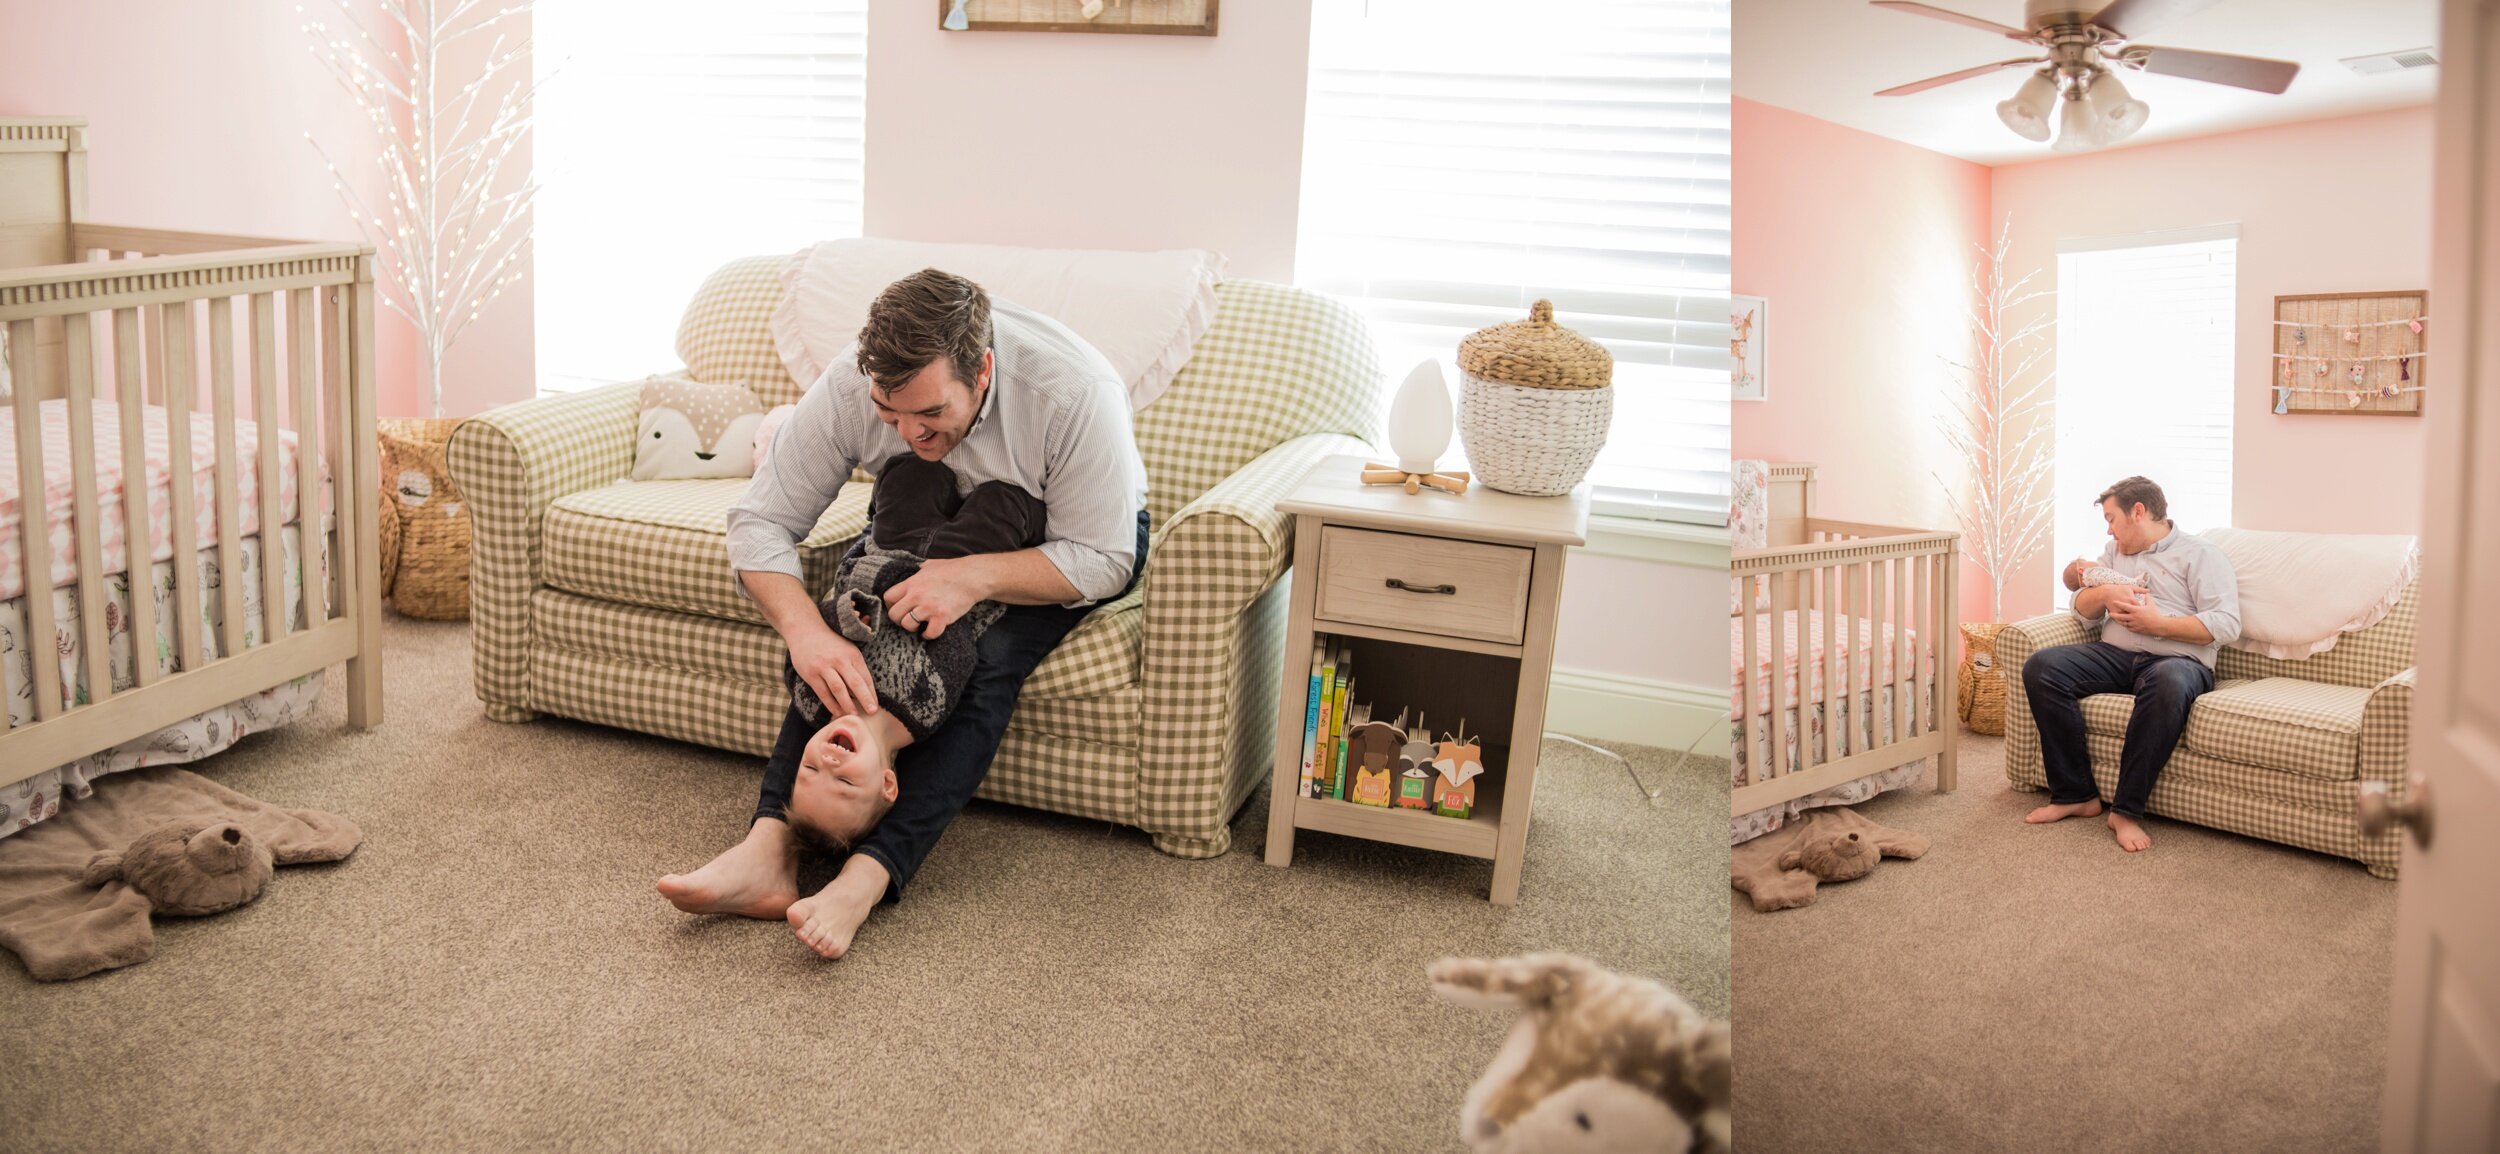 Lifestyle Newborn Photography in Lees Summit by Merry Ohler 12